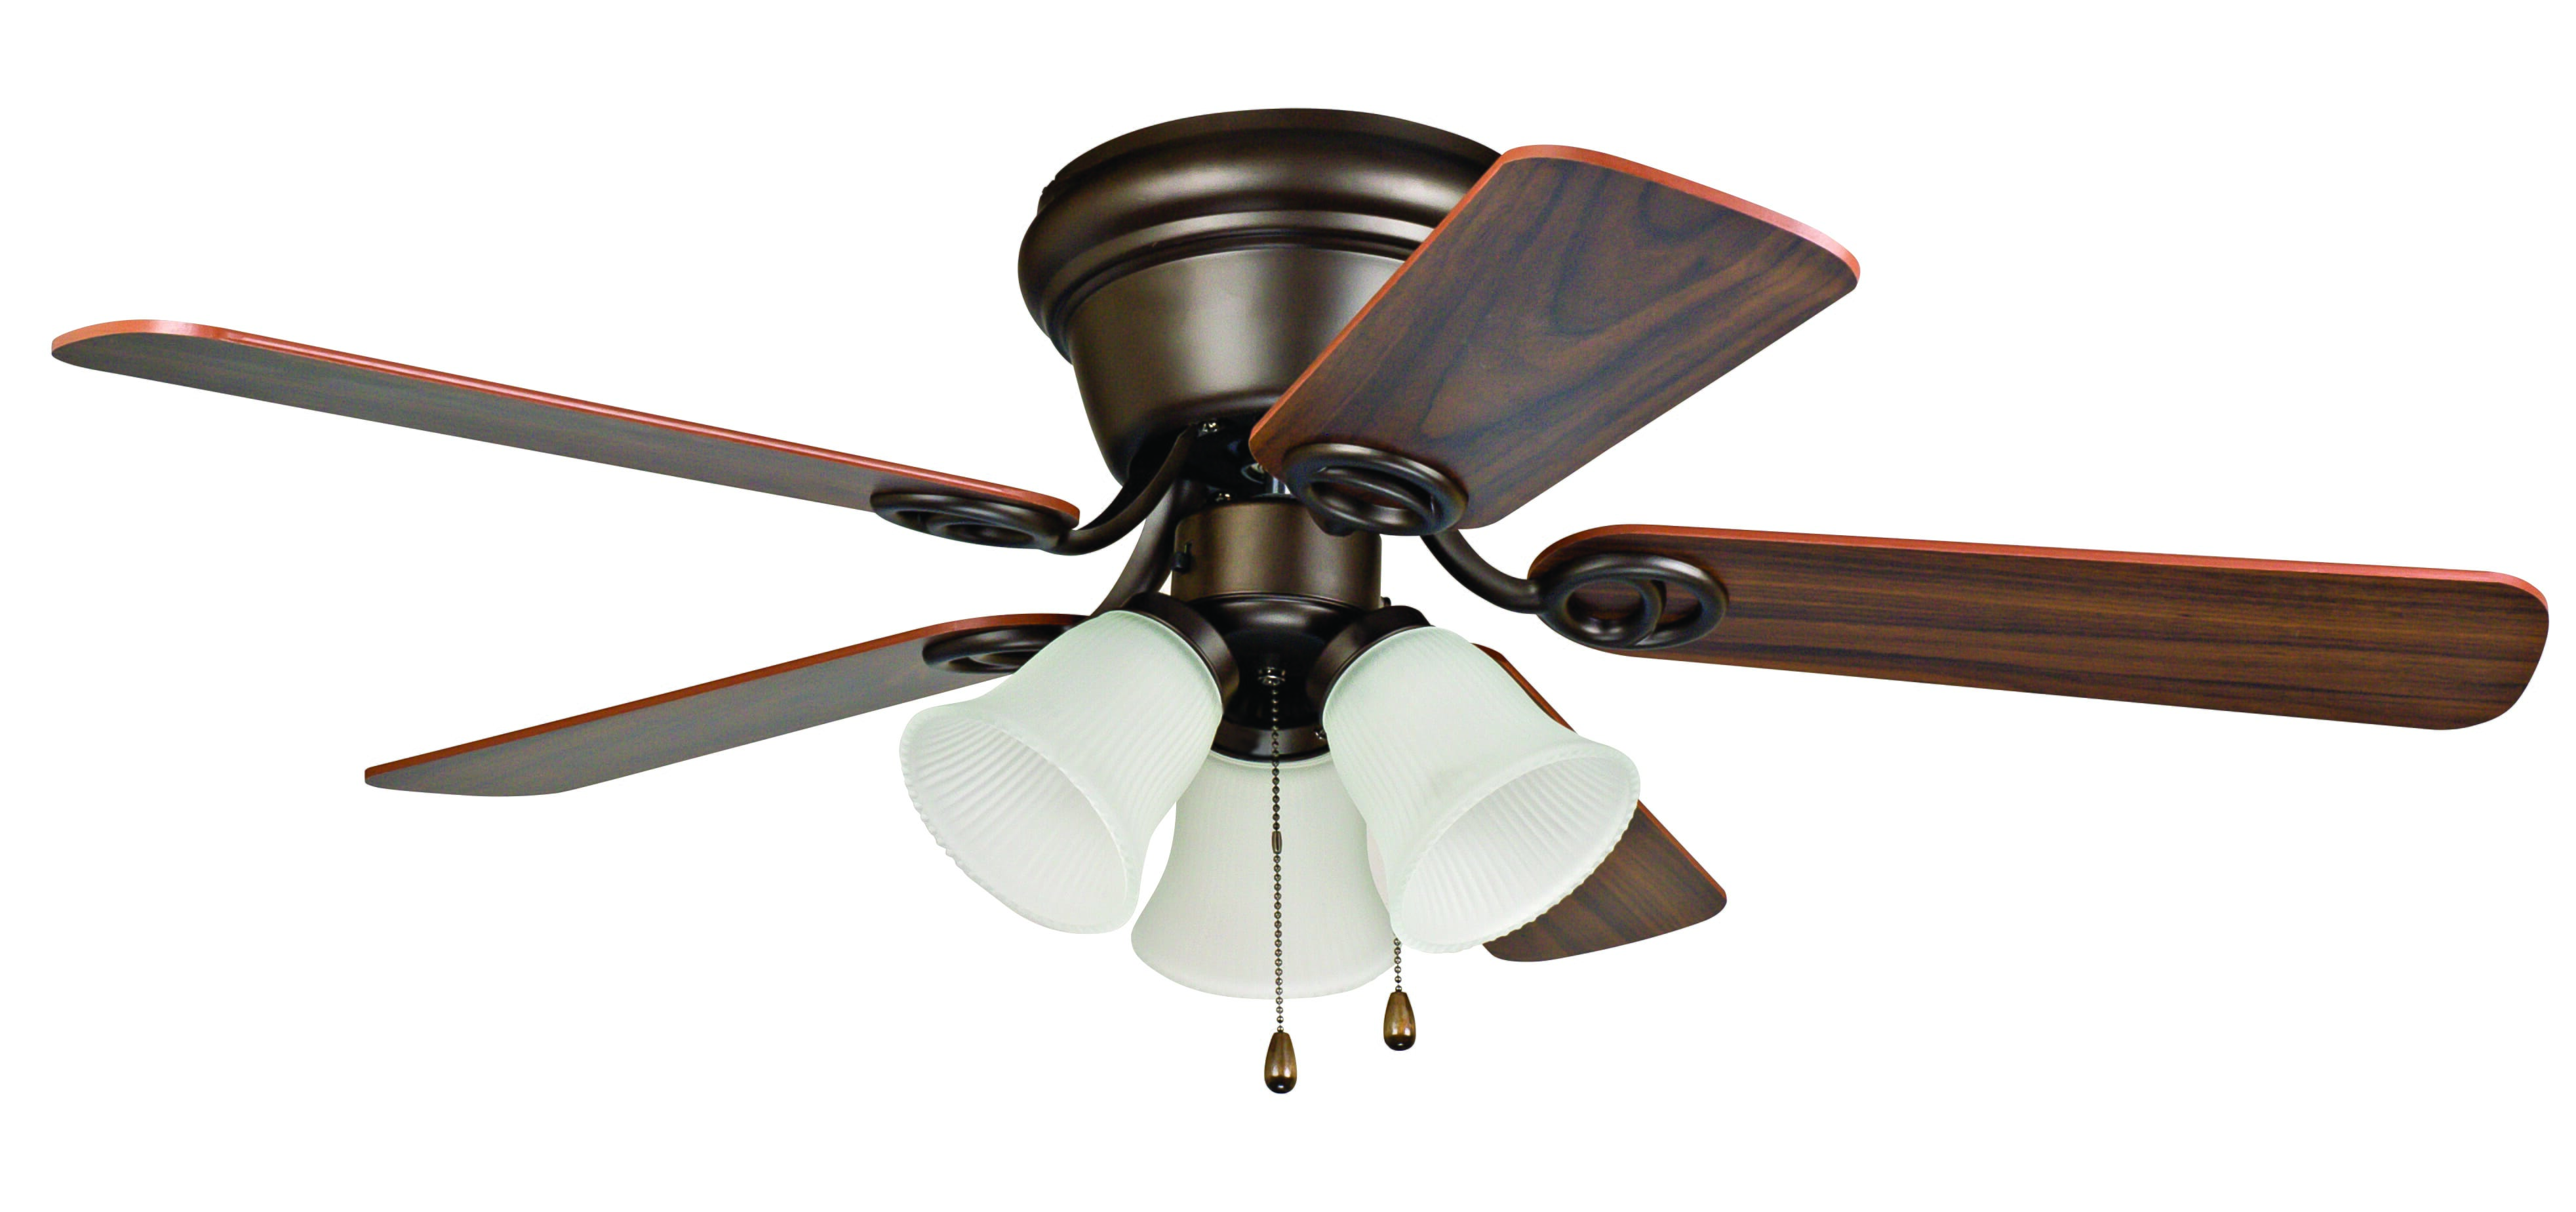 42" Oil Rubbed Bronze Ceiling Fan with Light Kit 543595 